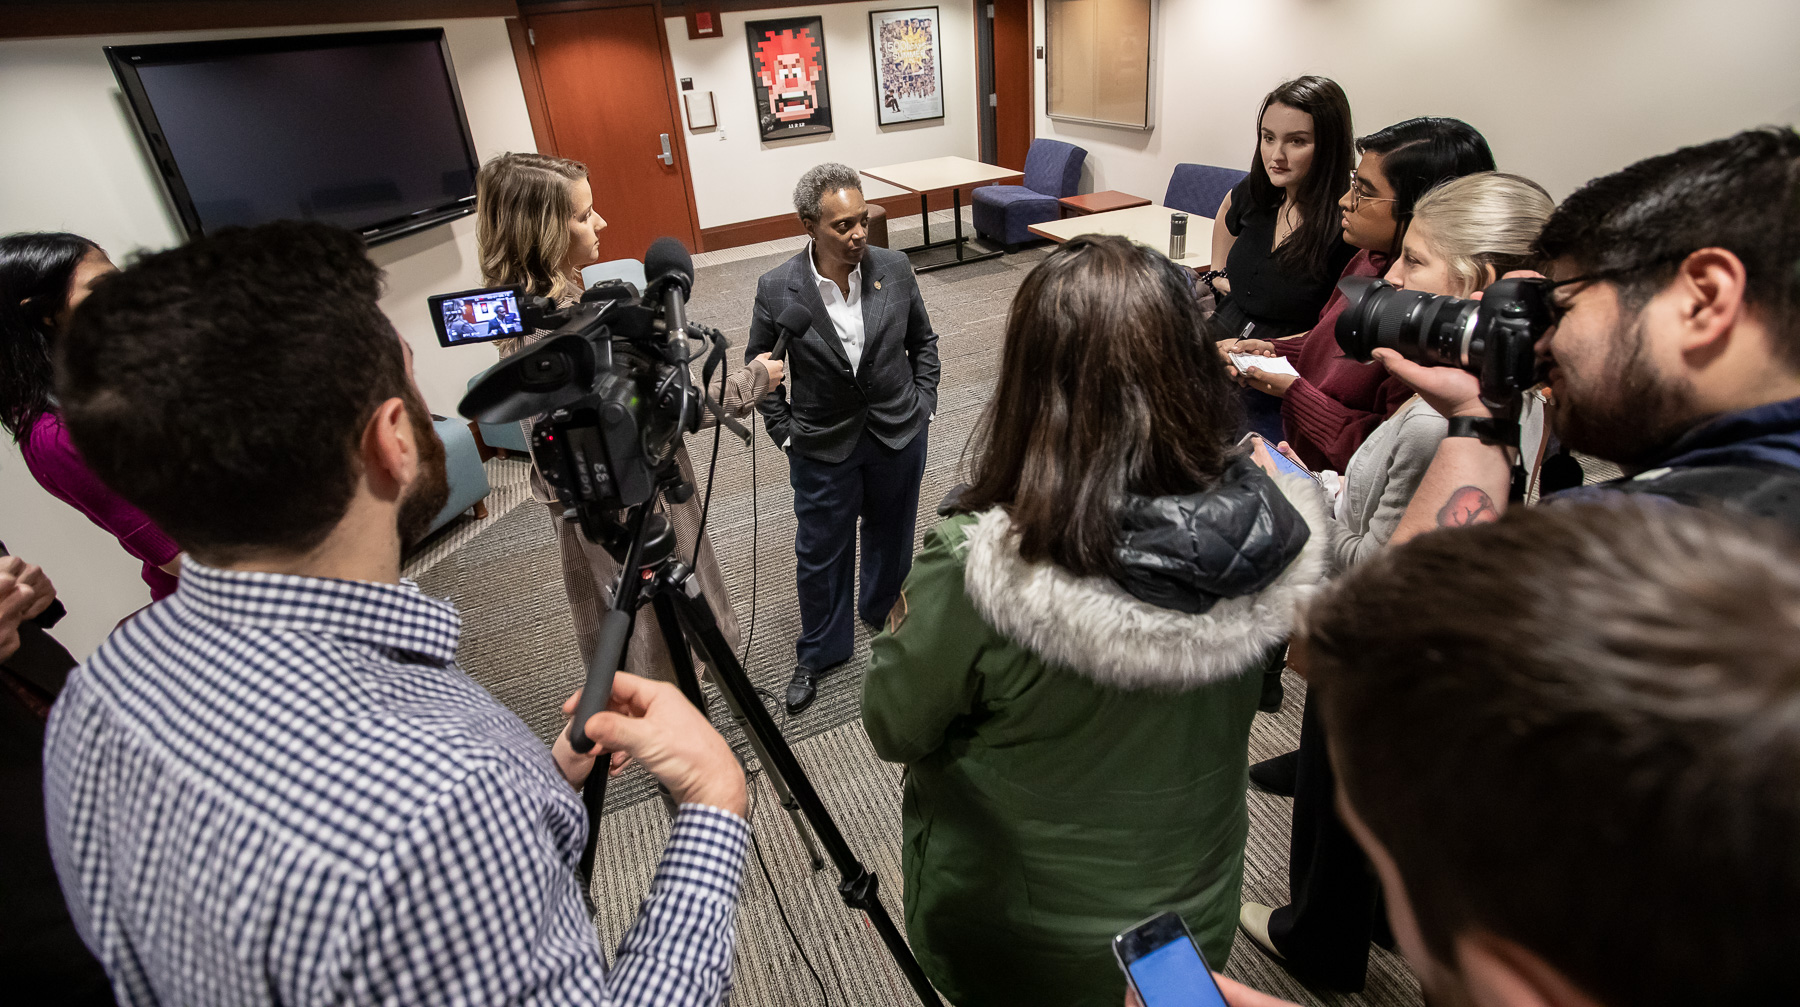 After the candid conversation, Lightfoot was interviewed by journalists from DePaul University student media outlets. (DePaul University/Jeff Carrion)